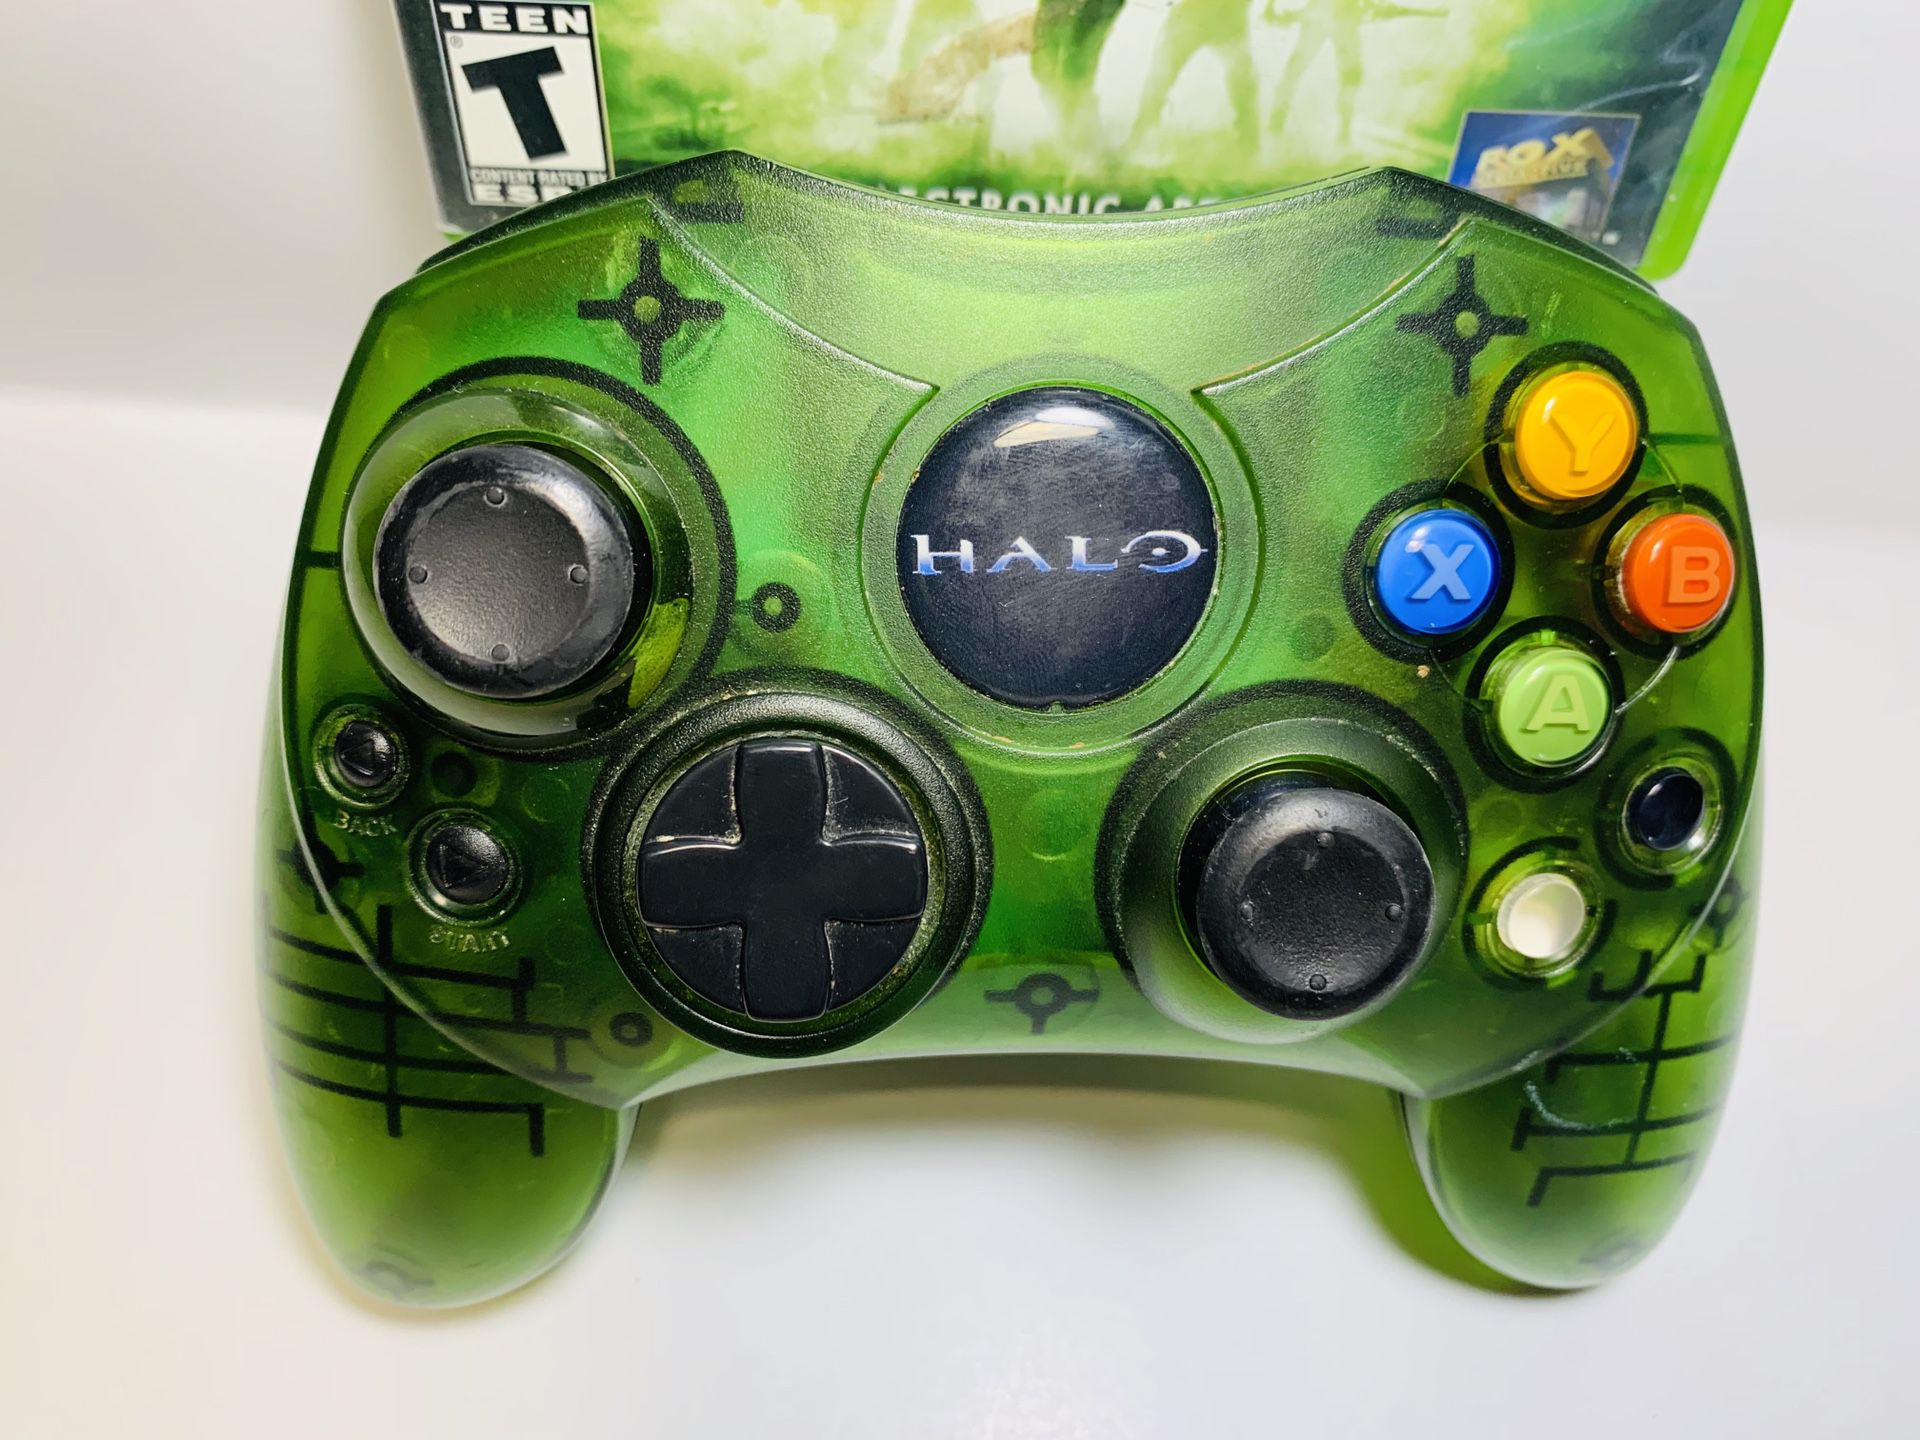 Limited Edition Original XBOX HALO Wired Controller w/ Aliens vs. Predator  Game for Sale in Grand Prairie, TX - OfferUp